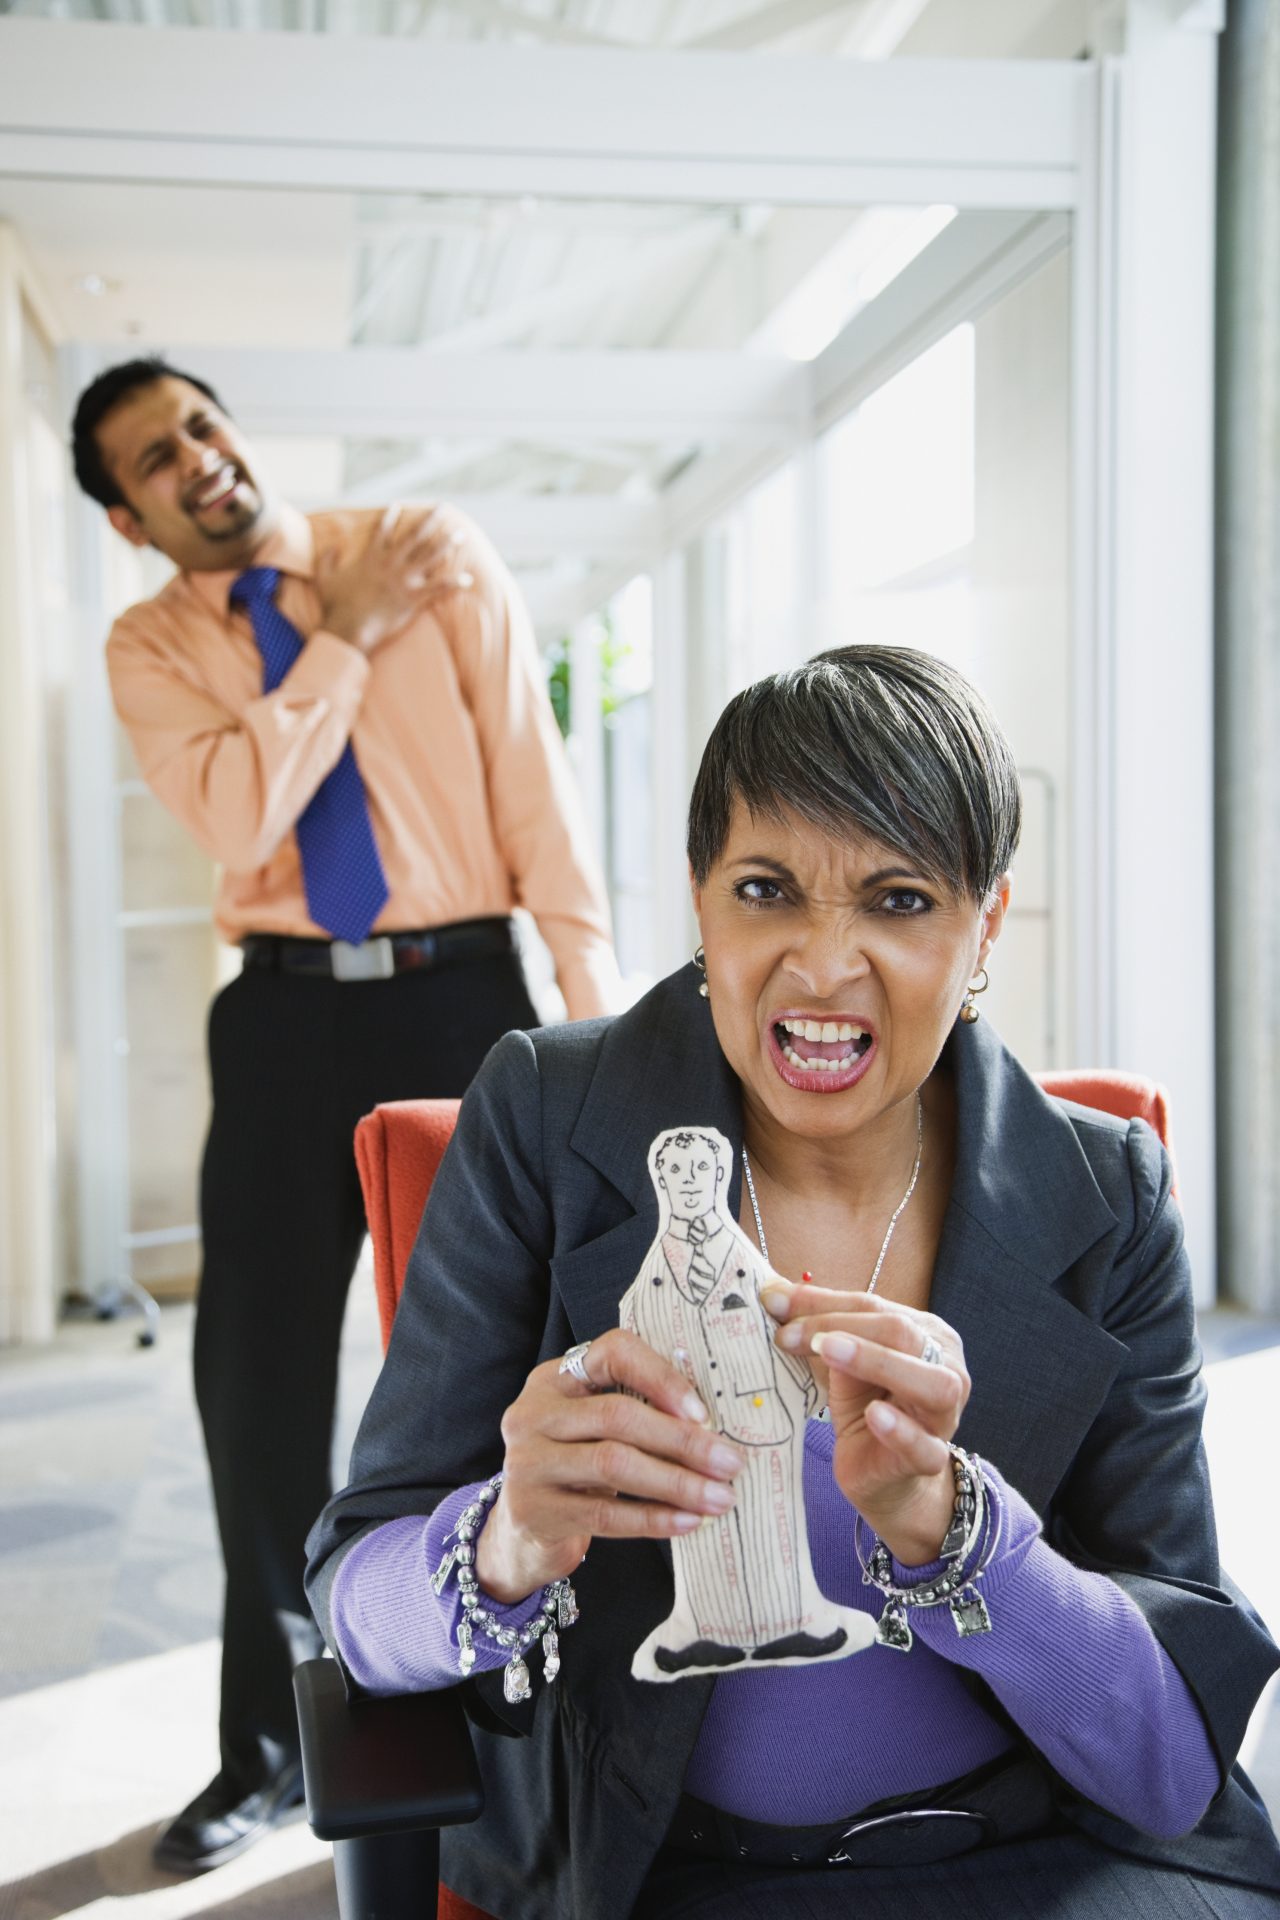 The effectiveness of using voodoo on your boss